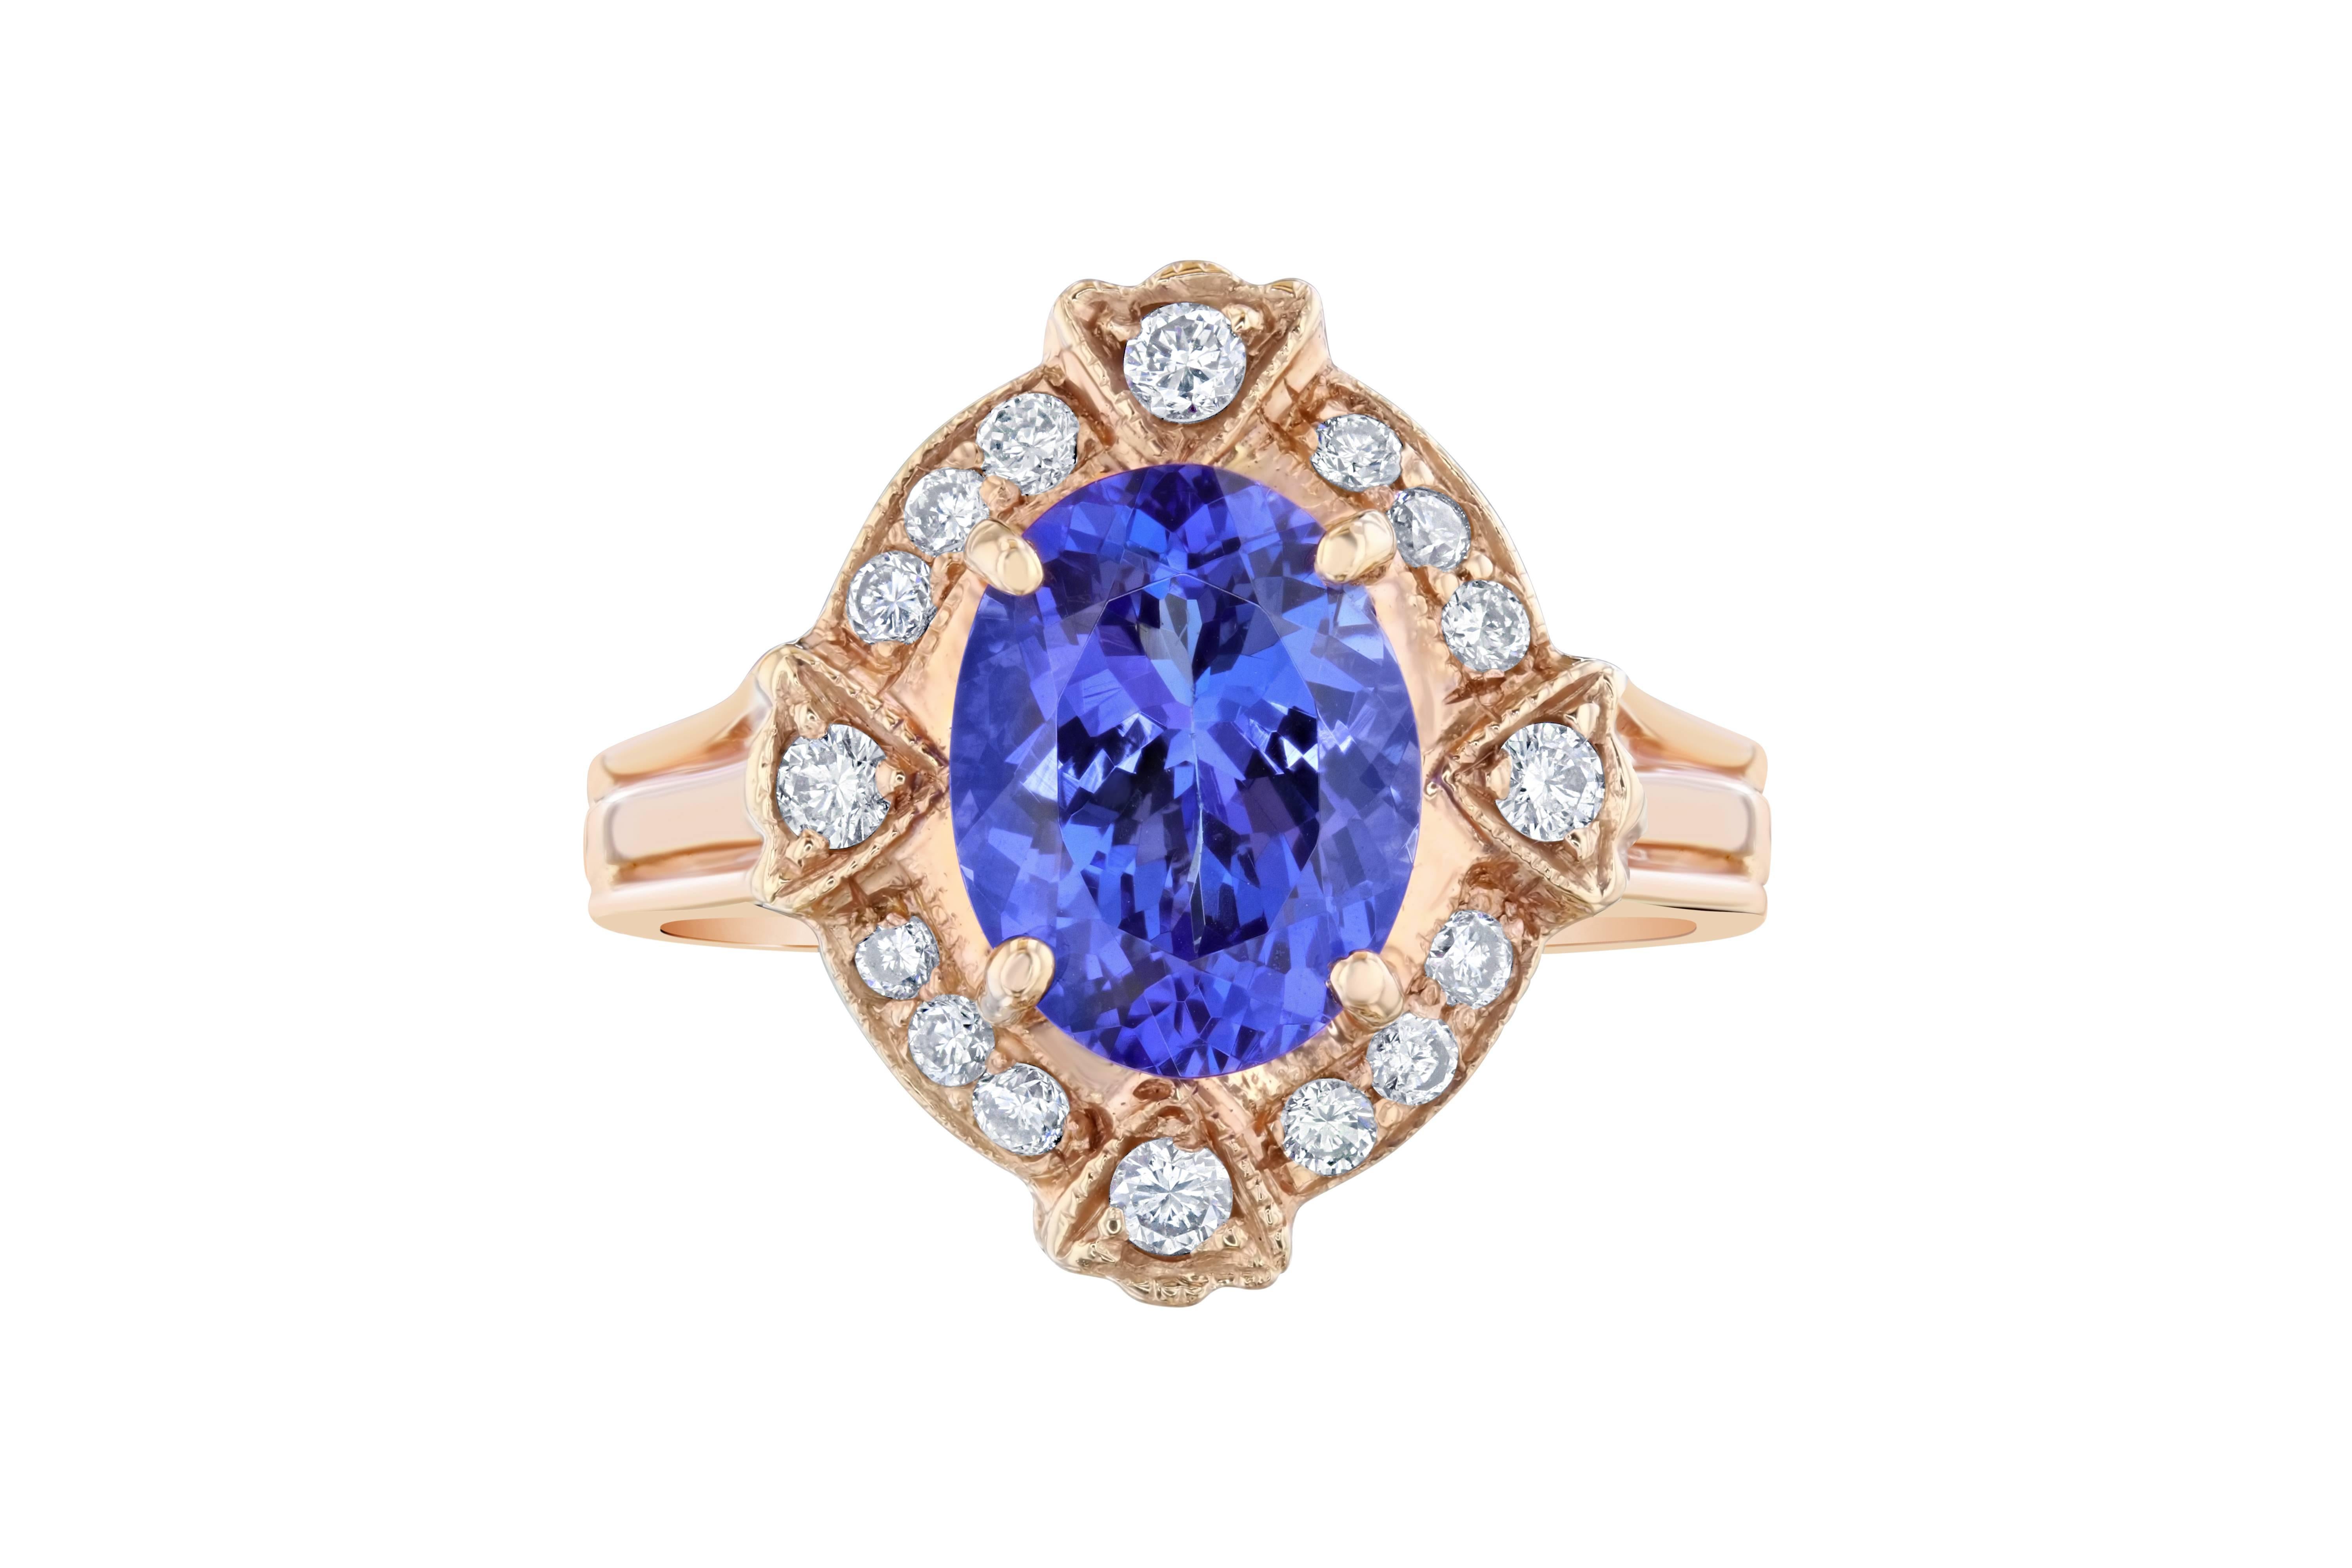 An Art-Deco inspired Tanzanite and Diamond ring set in a 14K Rose Gold Setting. The Tanzanite is an Oval cut stone that weighs 2.59 carats. The ring is surrounded by 16 Round Cut Diamonds that weigh 0.36 Carats. The Total Carat Weight of this ring